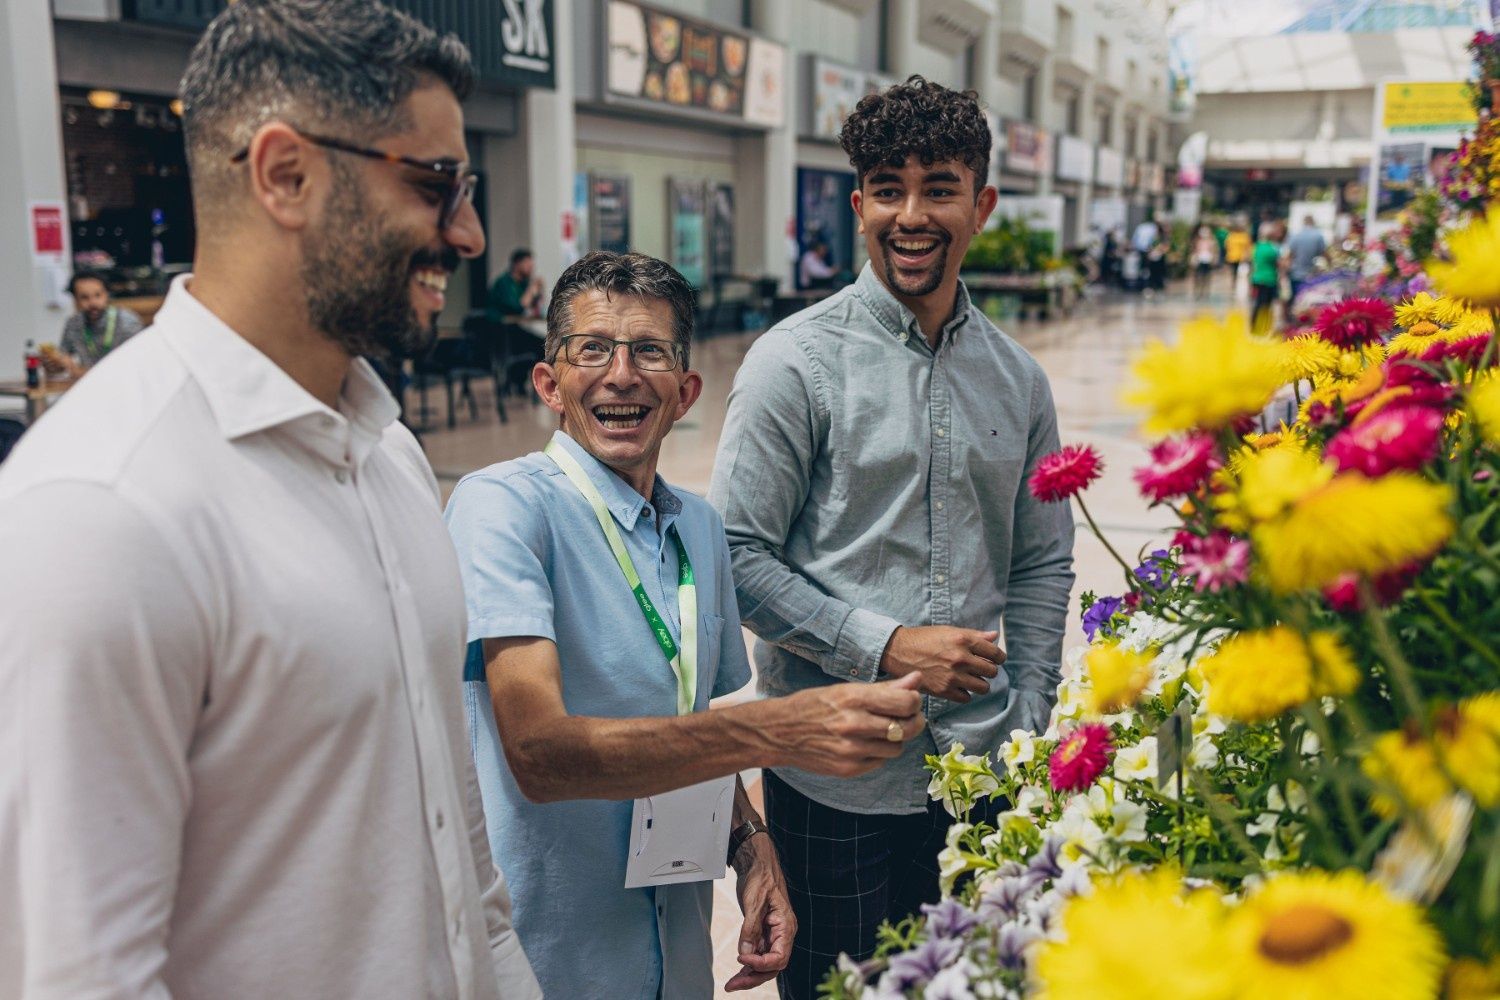 Three men of various ages laughing next to a stall full of vibrant pink and yellow flowers